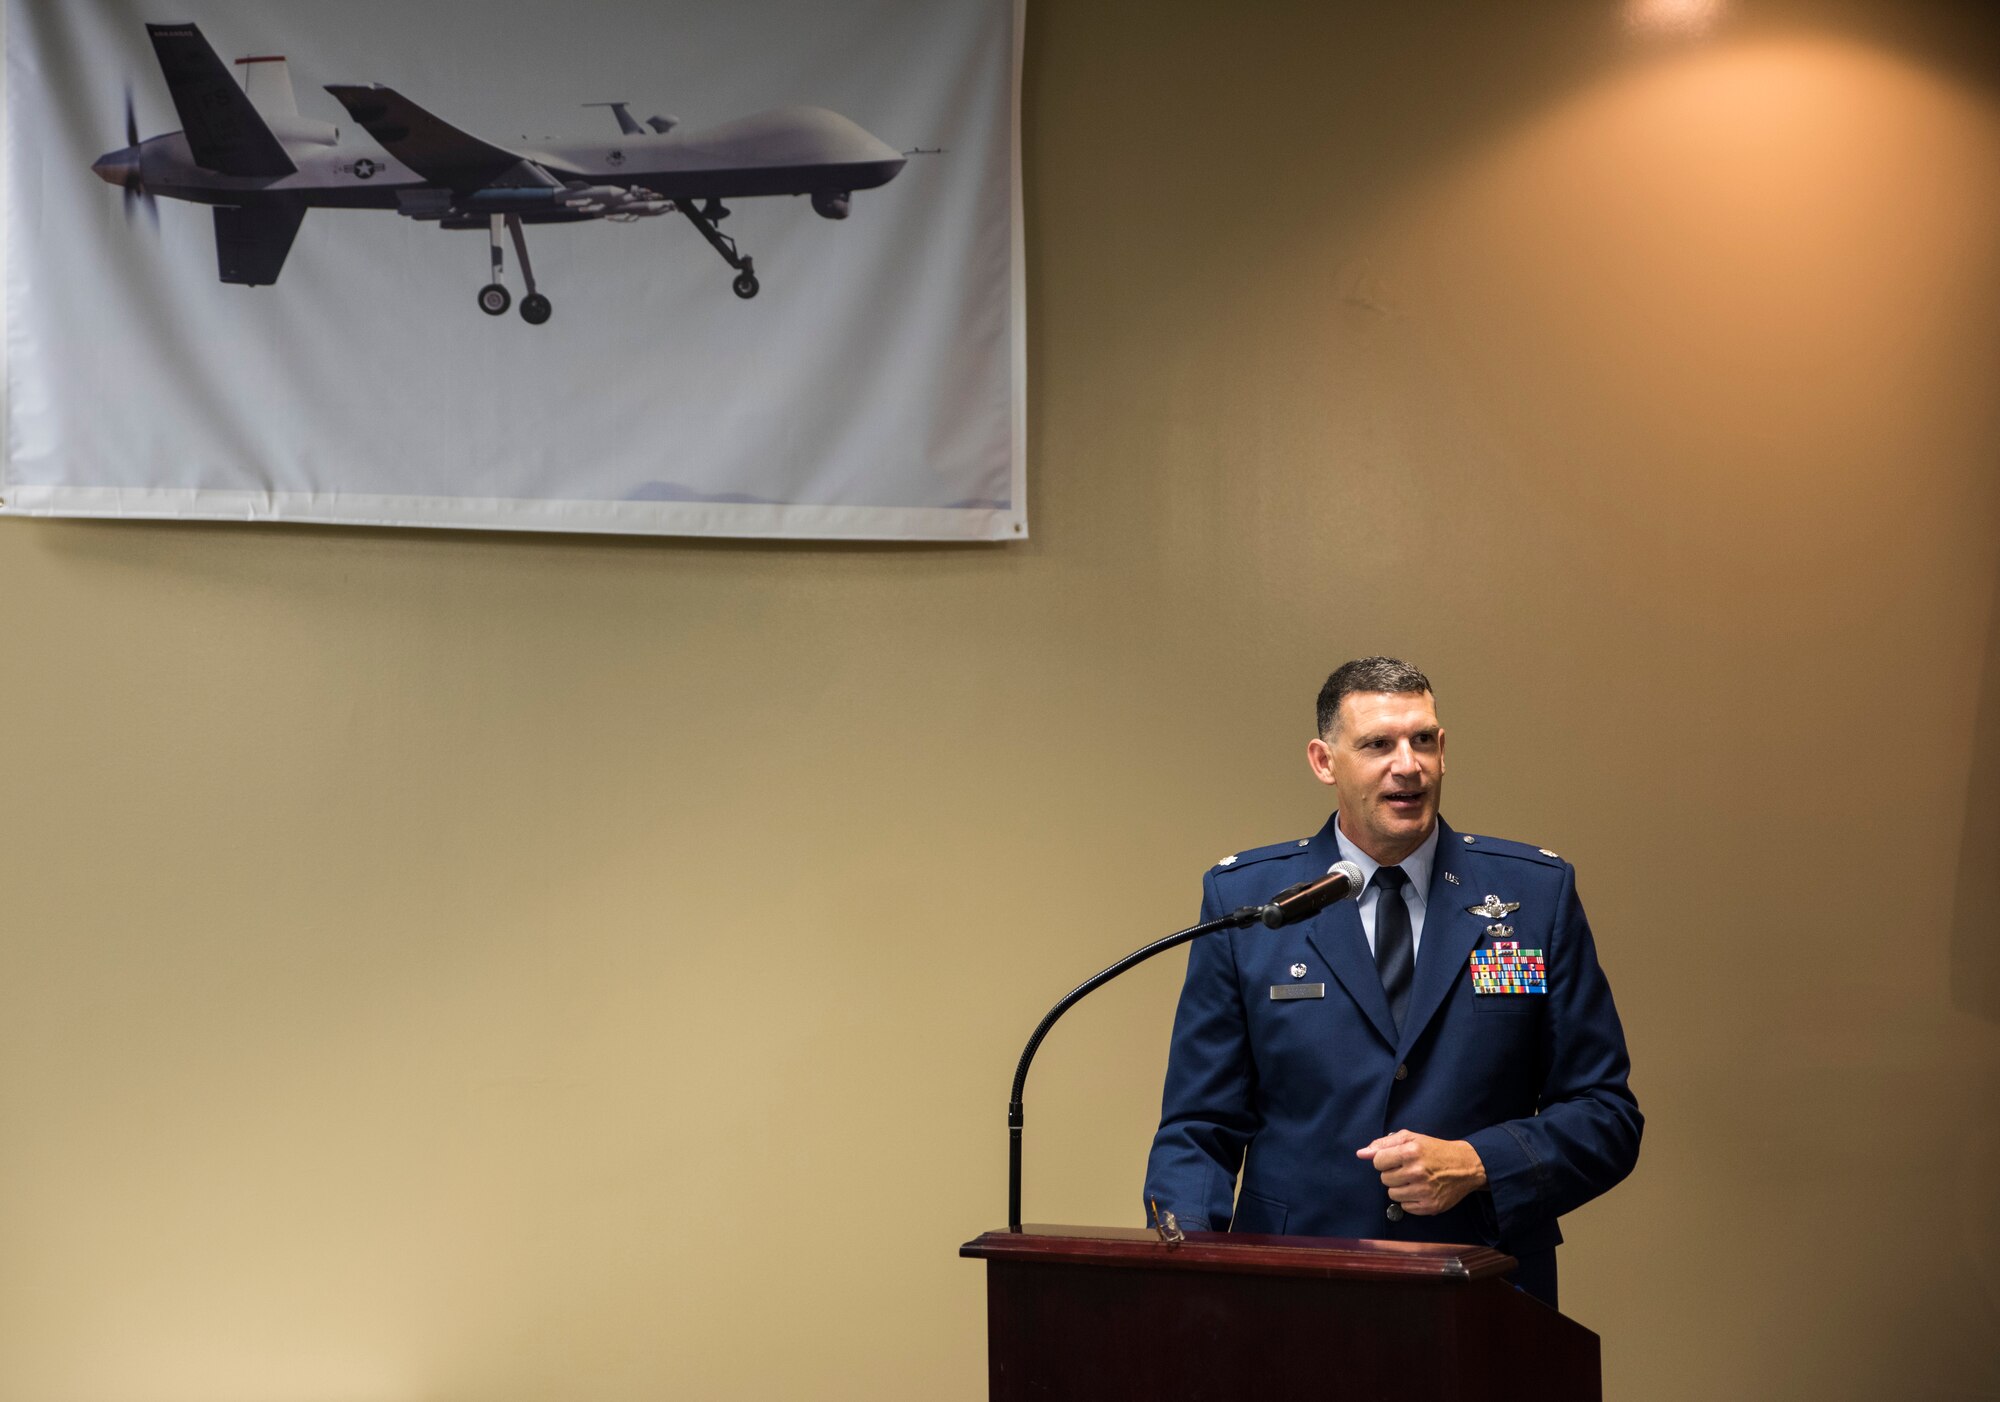 Lt. Col. Leon Dodroe expresses how grateful and excited he is June 26, 2016, to join the 188th OG as he assumes command of the 188th Operations Group at Ebbing Air National Guard Base, Fort Smith, Ark. As commander, Dodroe will complete the wing’s mission conversion to the MQ-9 Reaper and continue the custom of professionalism and dedication within the 188th OG. (U.S. Air National Guard photo by Senior Airman Cody Martin/Released)